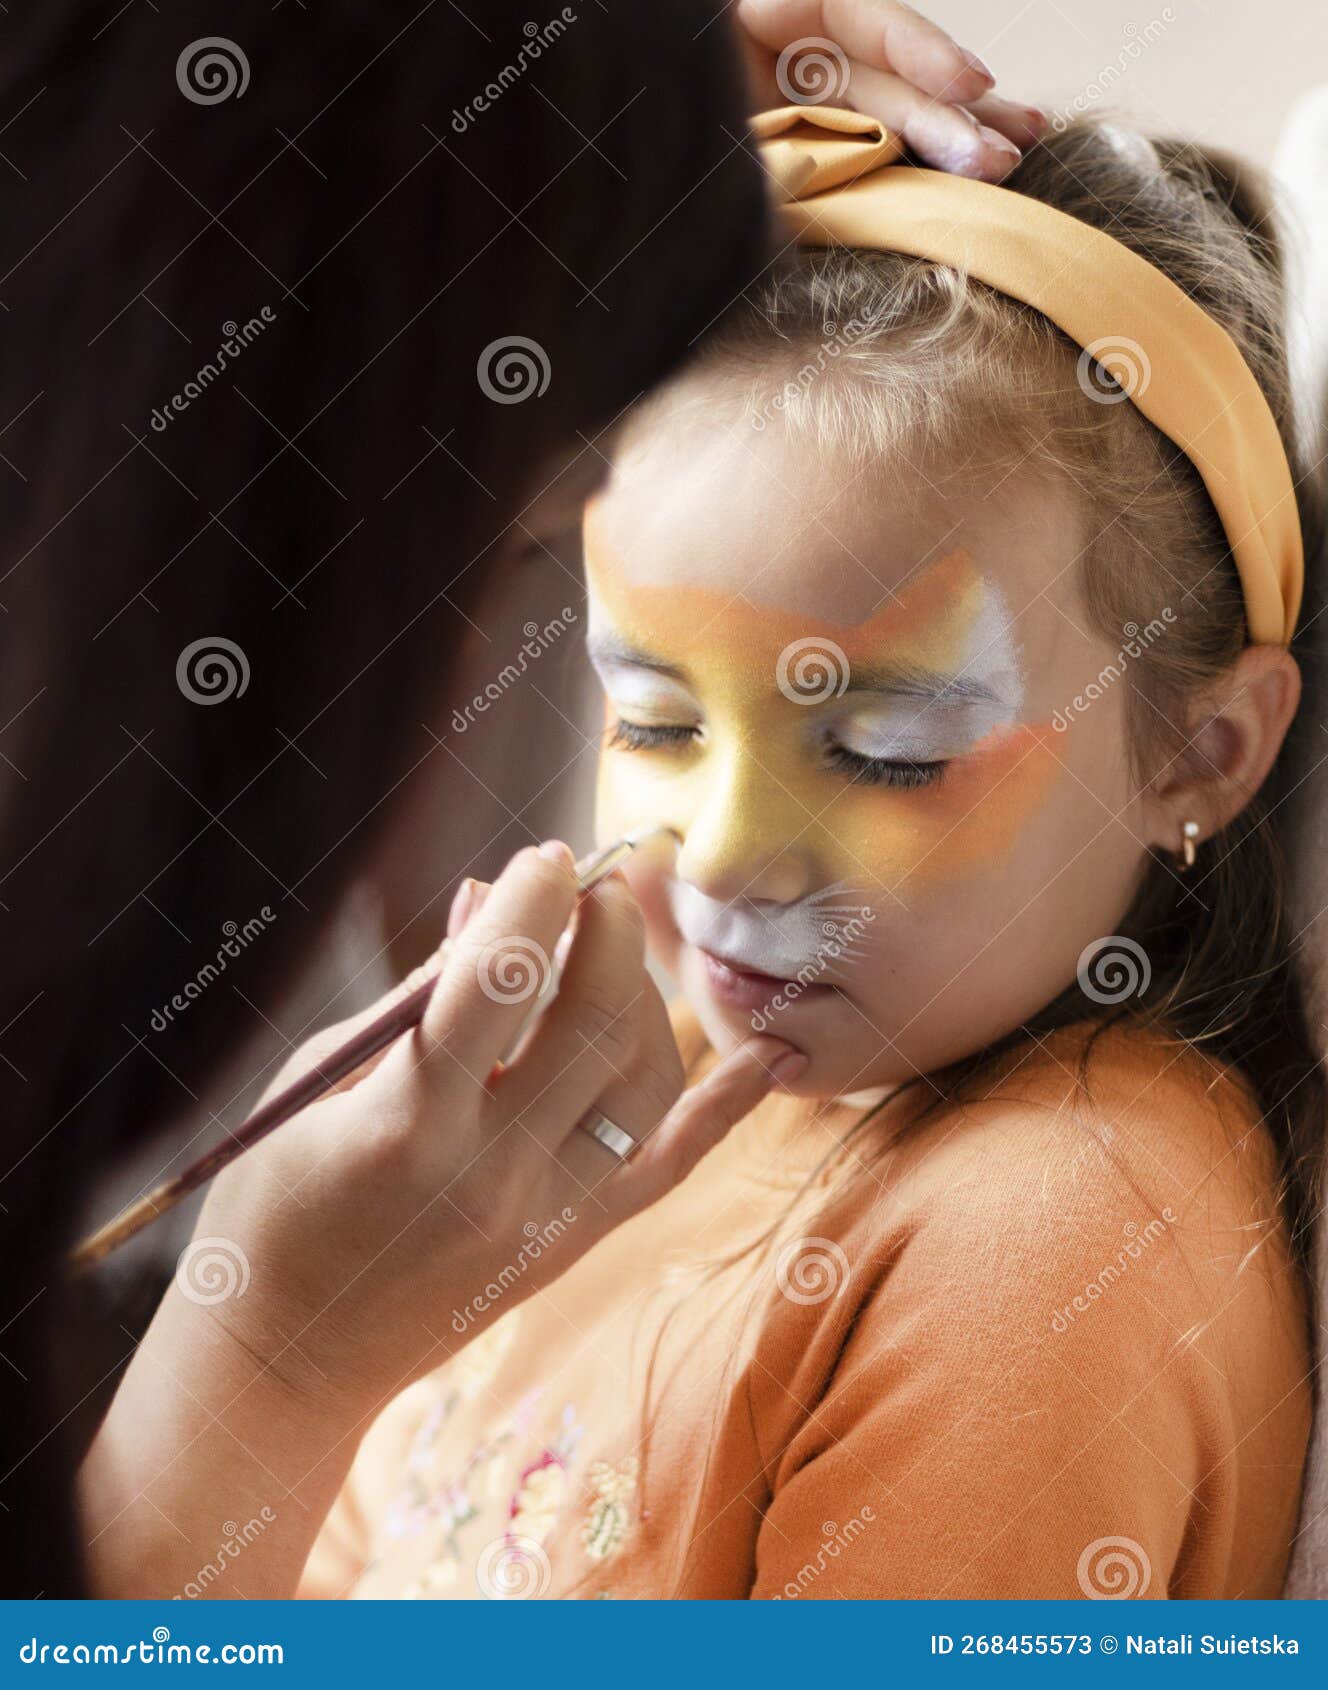 Cute Makeup Little Tiger. Girl Getting Face Painting Outdoors, Stock Image  - Image of birthday, mask: 268455573